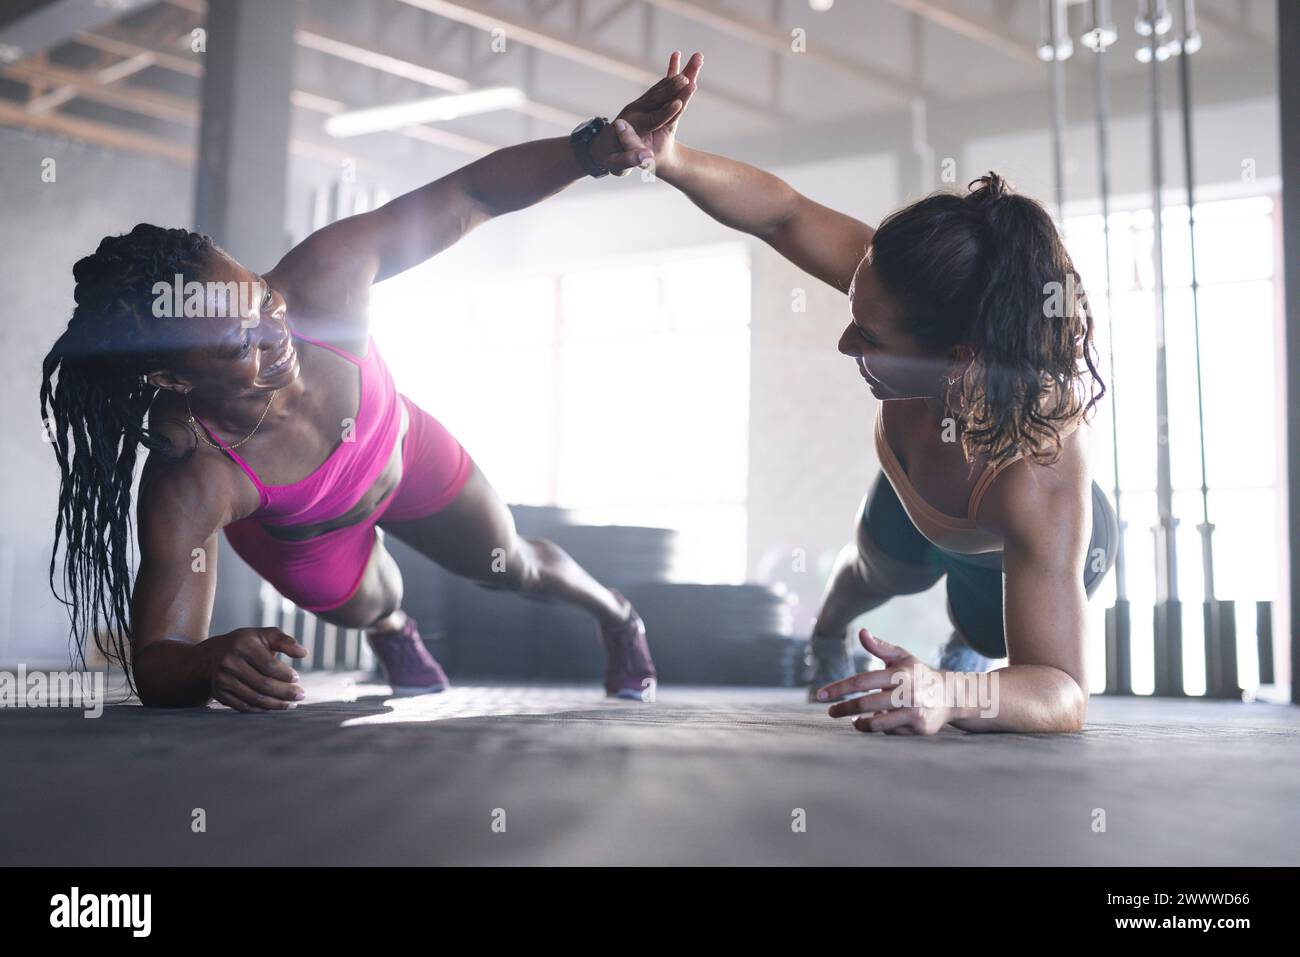 Two fit women are giving high-fives during a workout session in the gym Stock Photo